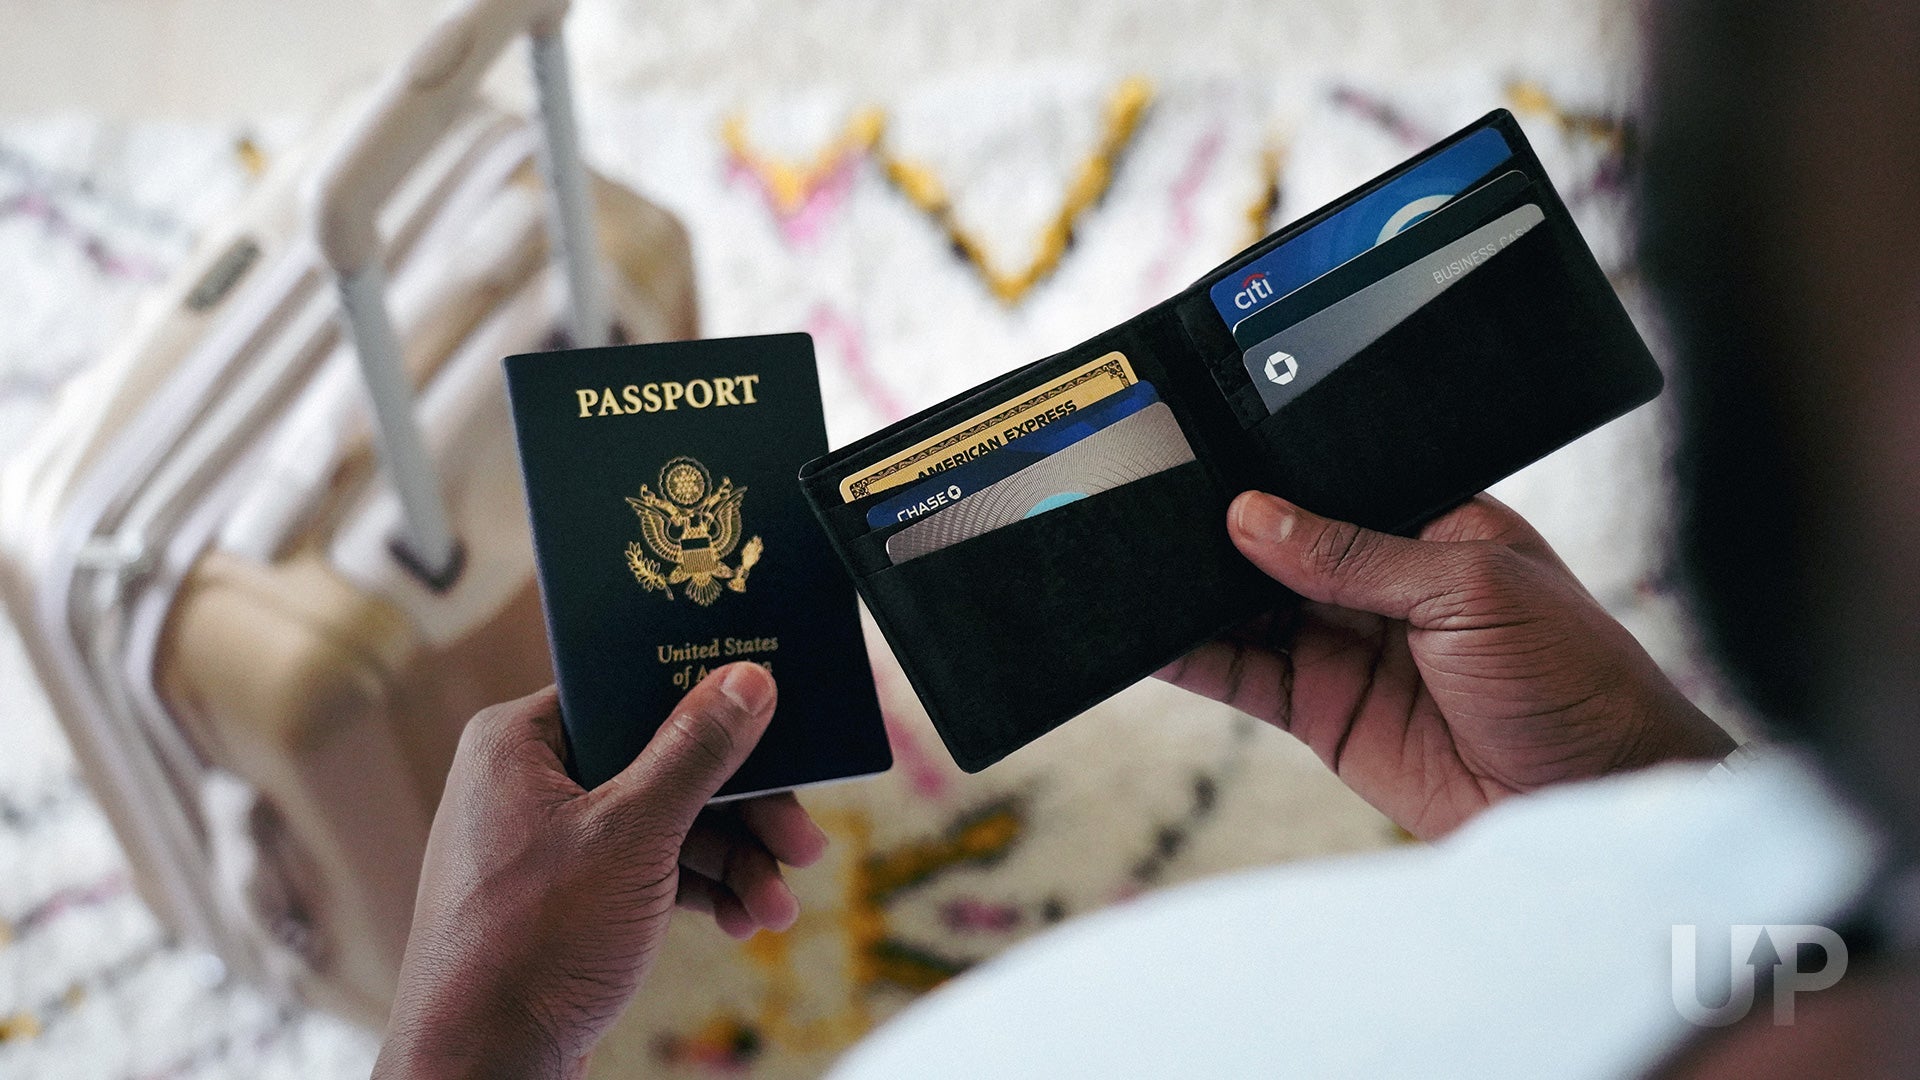 Credit Cards in Wallet Suitcase Upgraded Points LLC